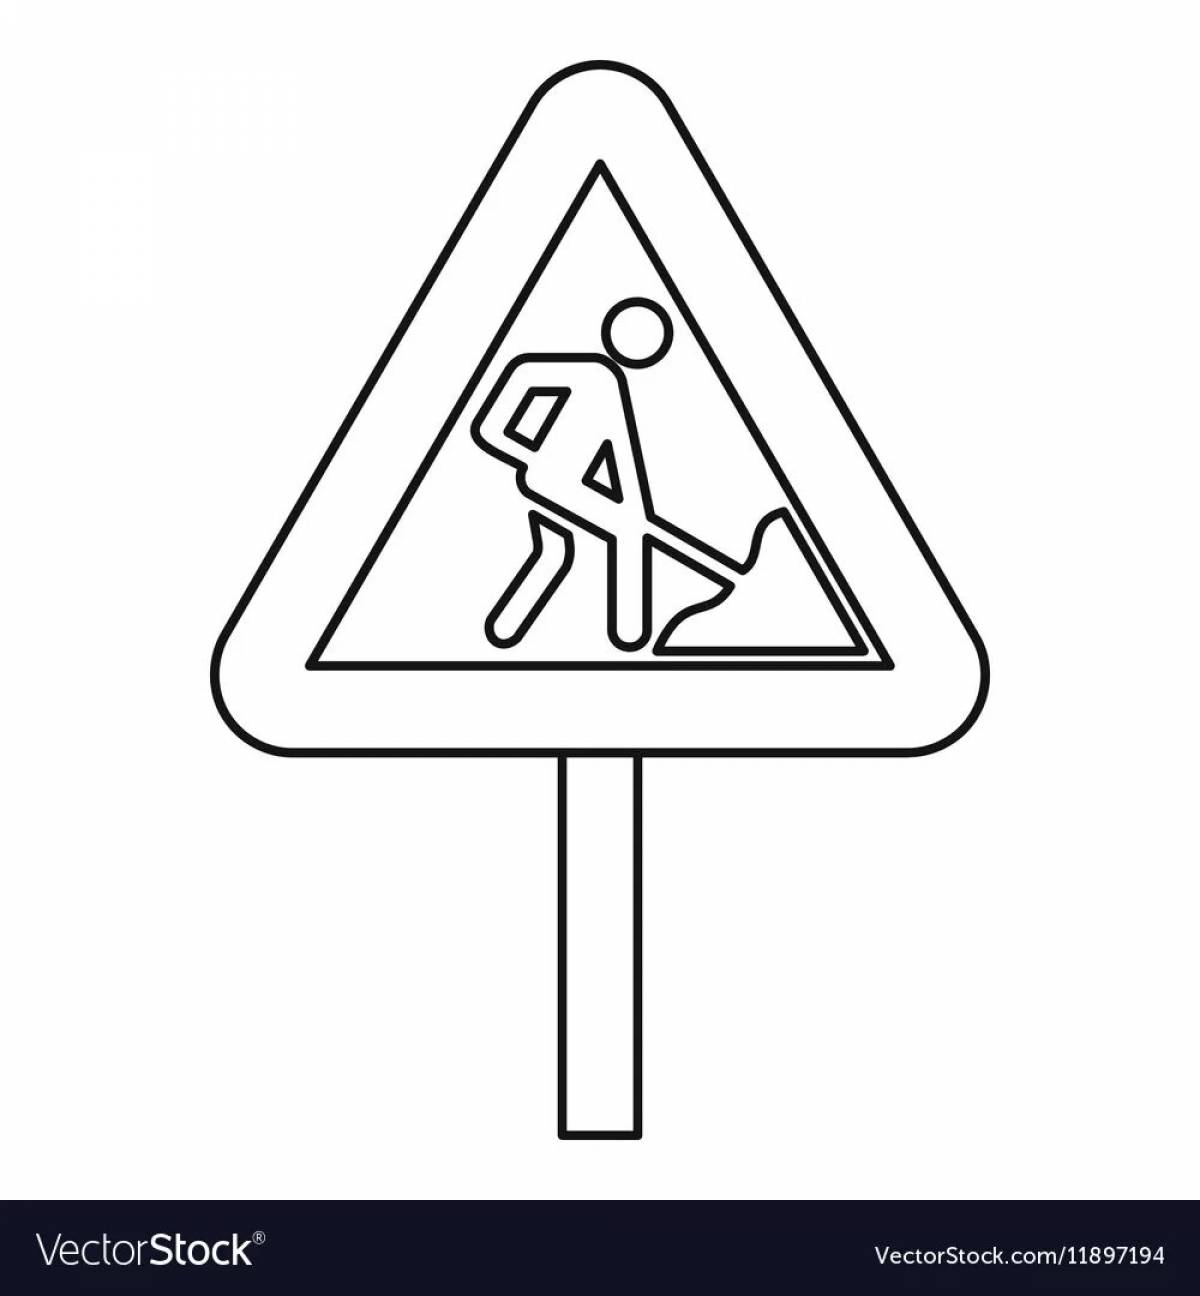 Attractive underpass sign coloring page